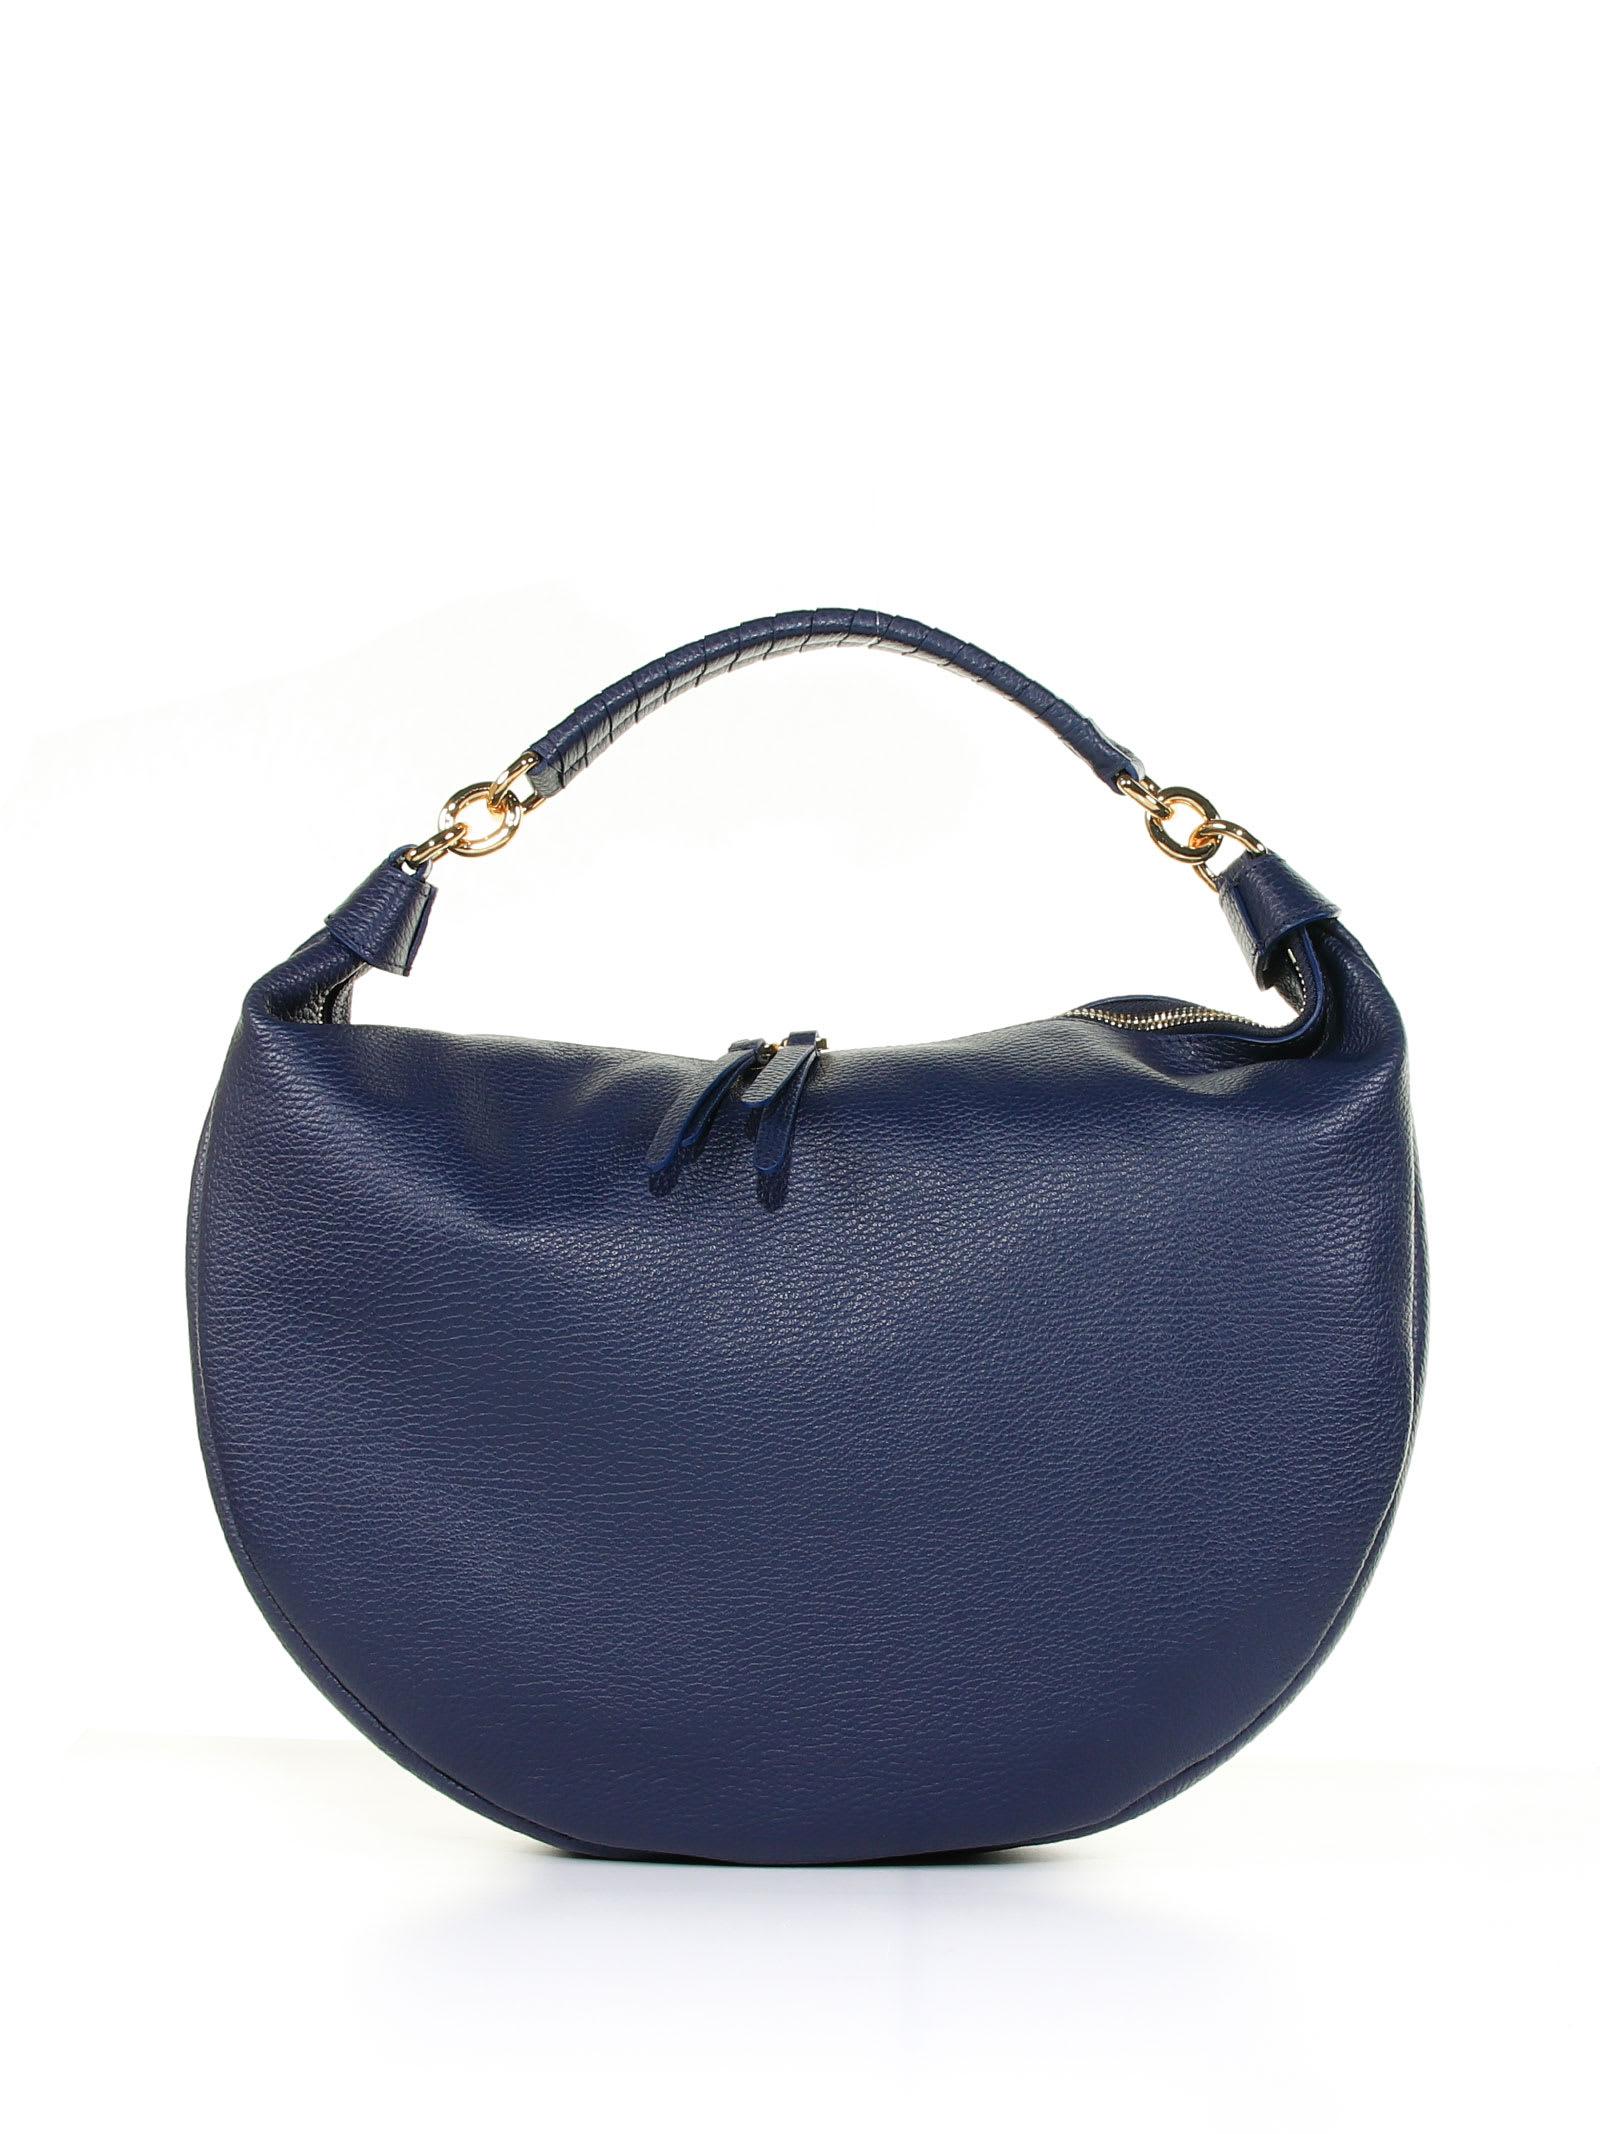 Coccinelle Melody Leather Bag in Blue | Lyst